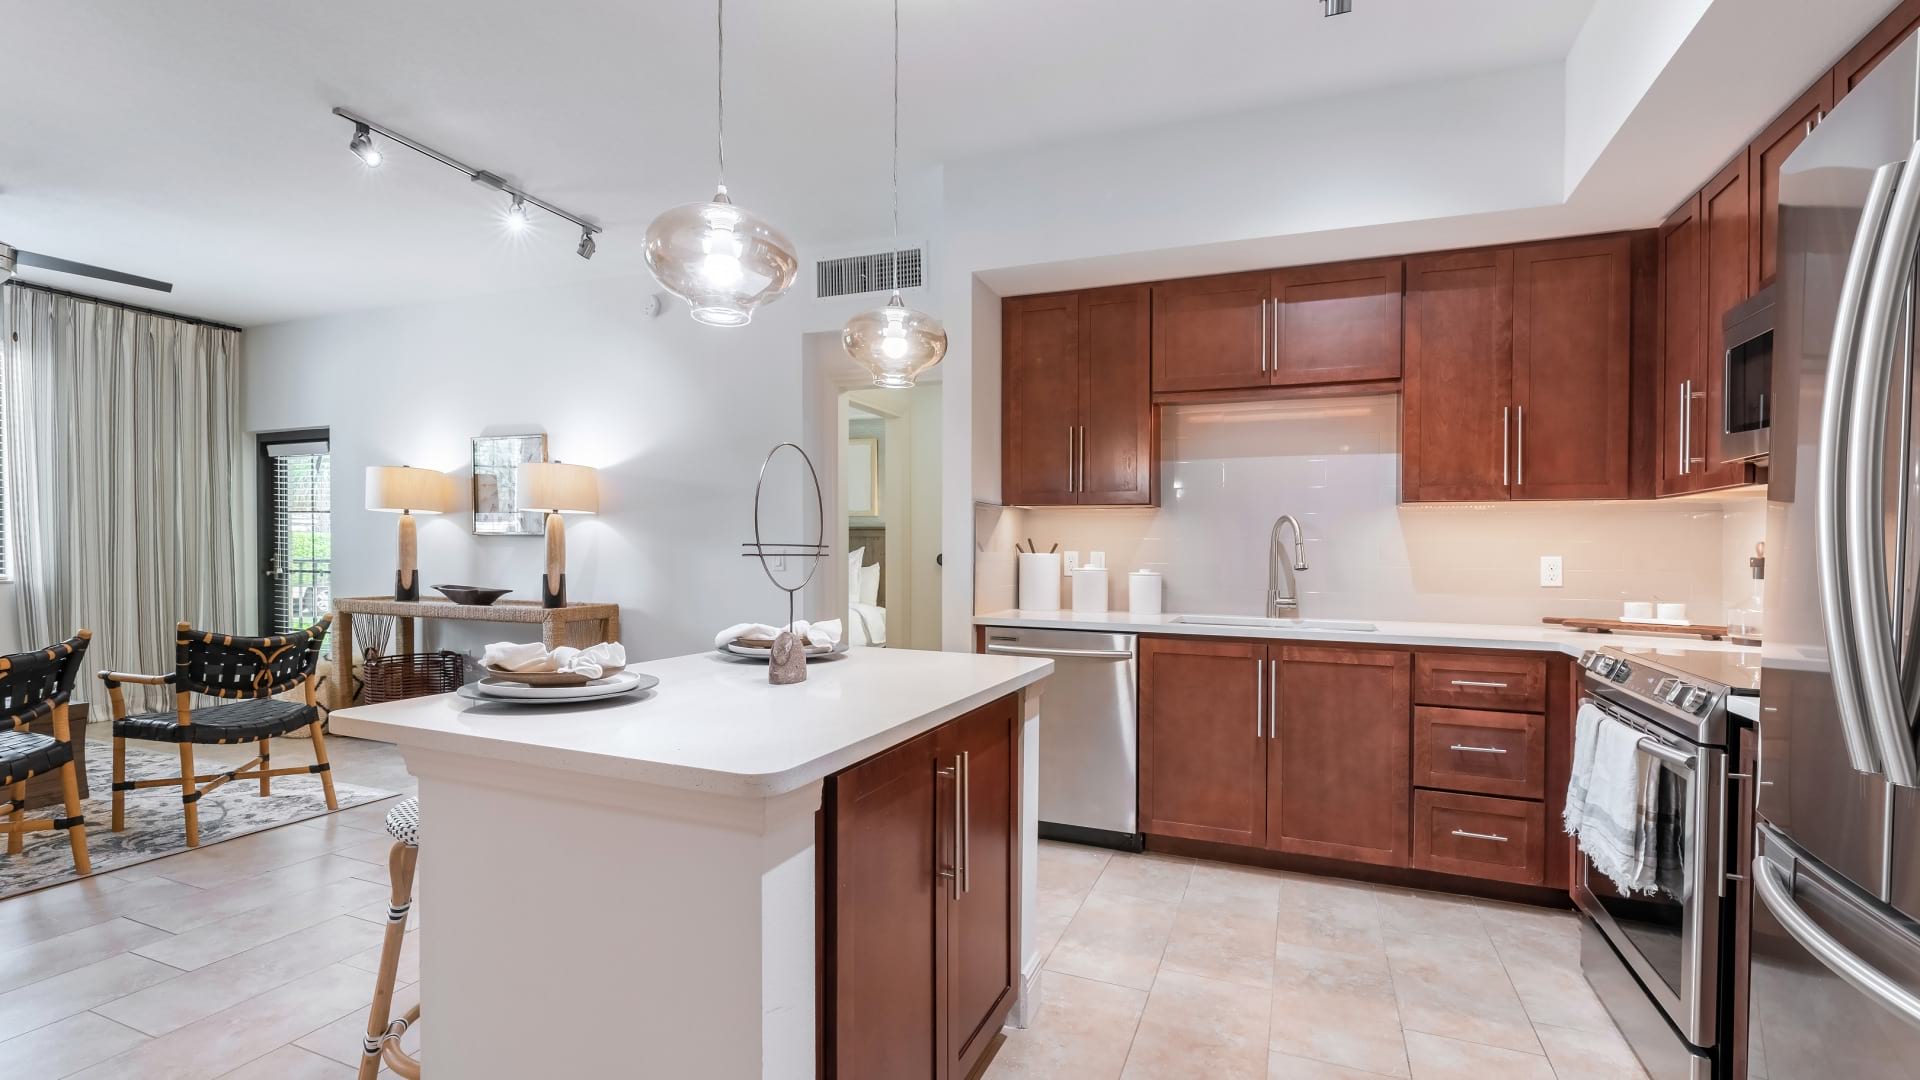 Modern Kitchen Islands and Lighting at Our Boca Raton Apartments 